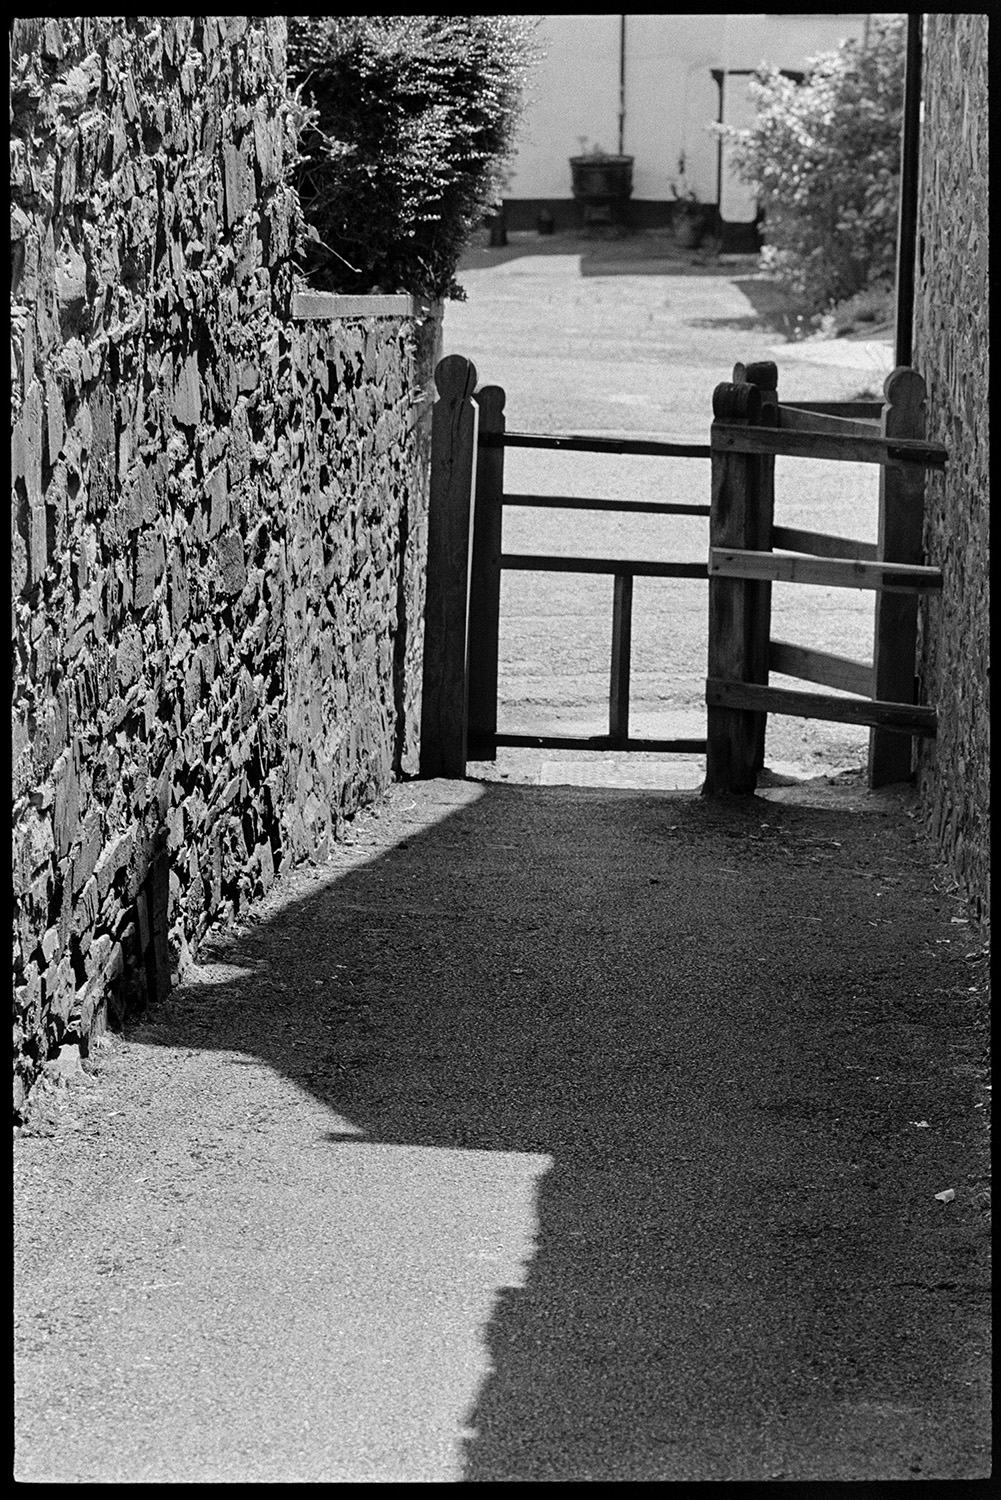 A walled footpath leading to a kissing gate, possibly in Dolton. The shadow of a building is falling across the path. James Ravilious took this image as a test shot to experiment with a new lens.